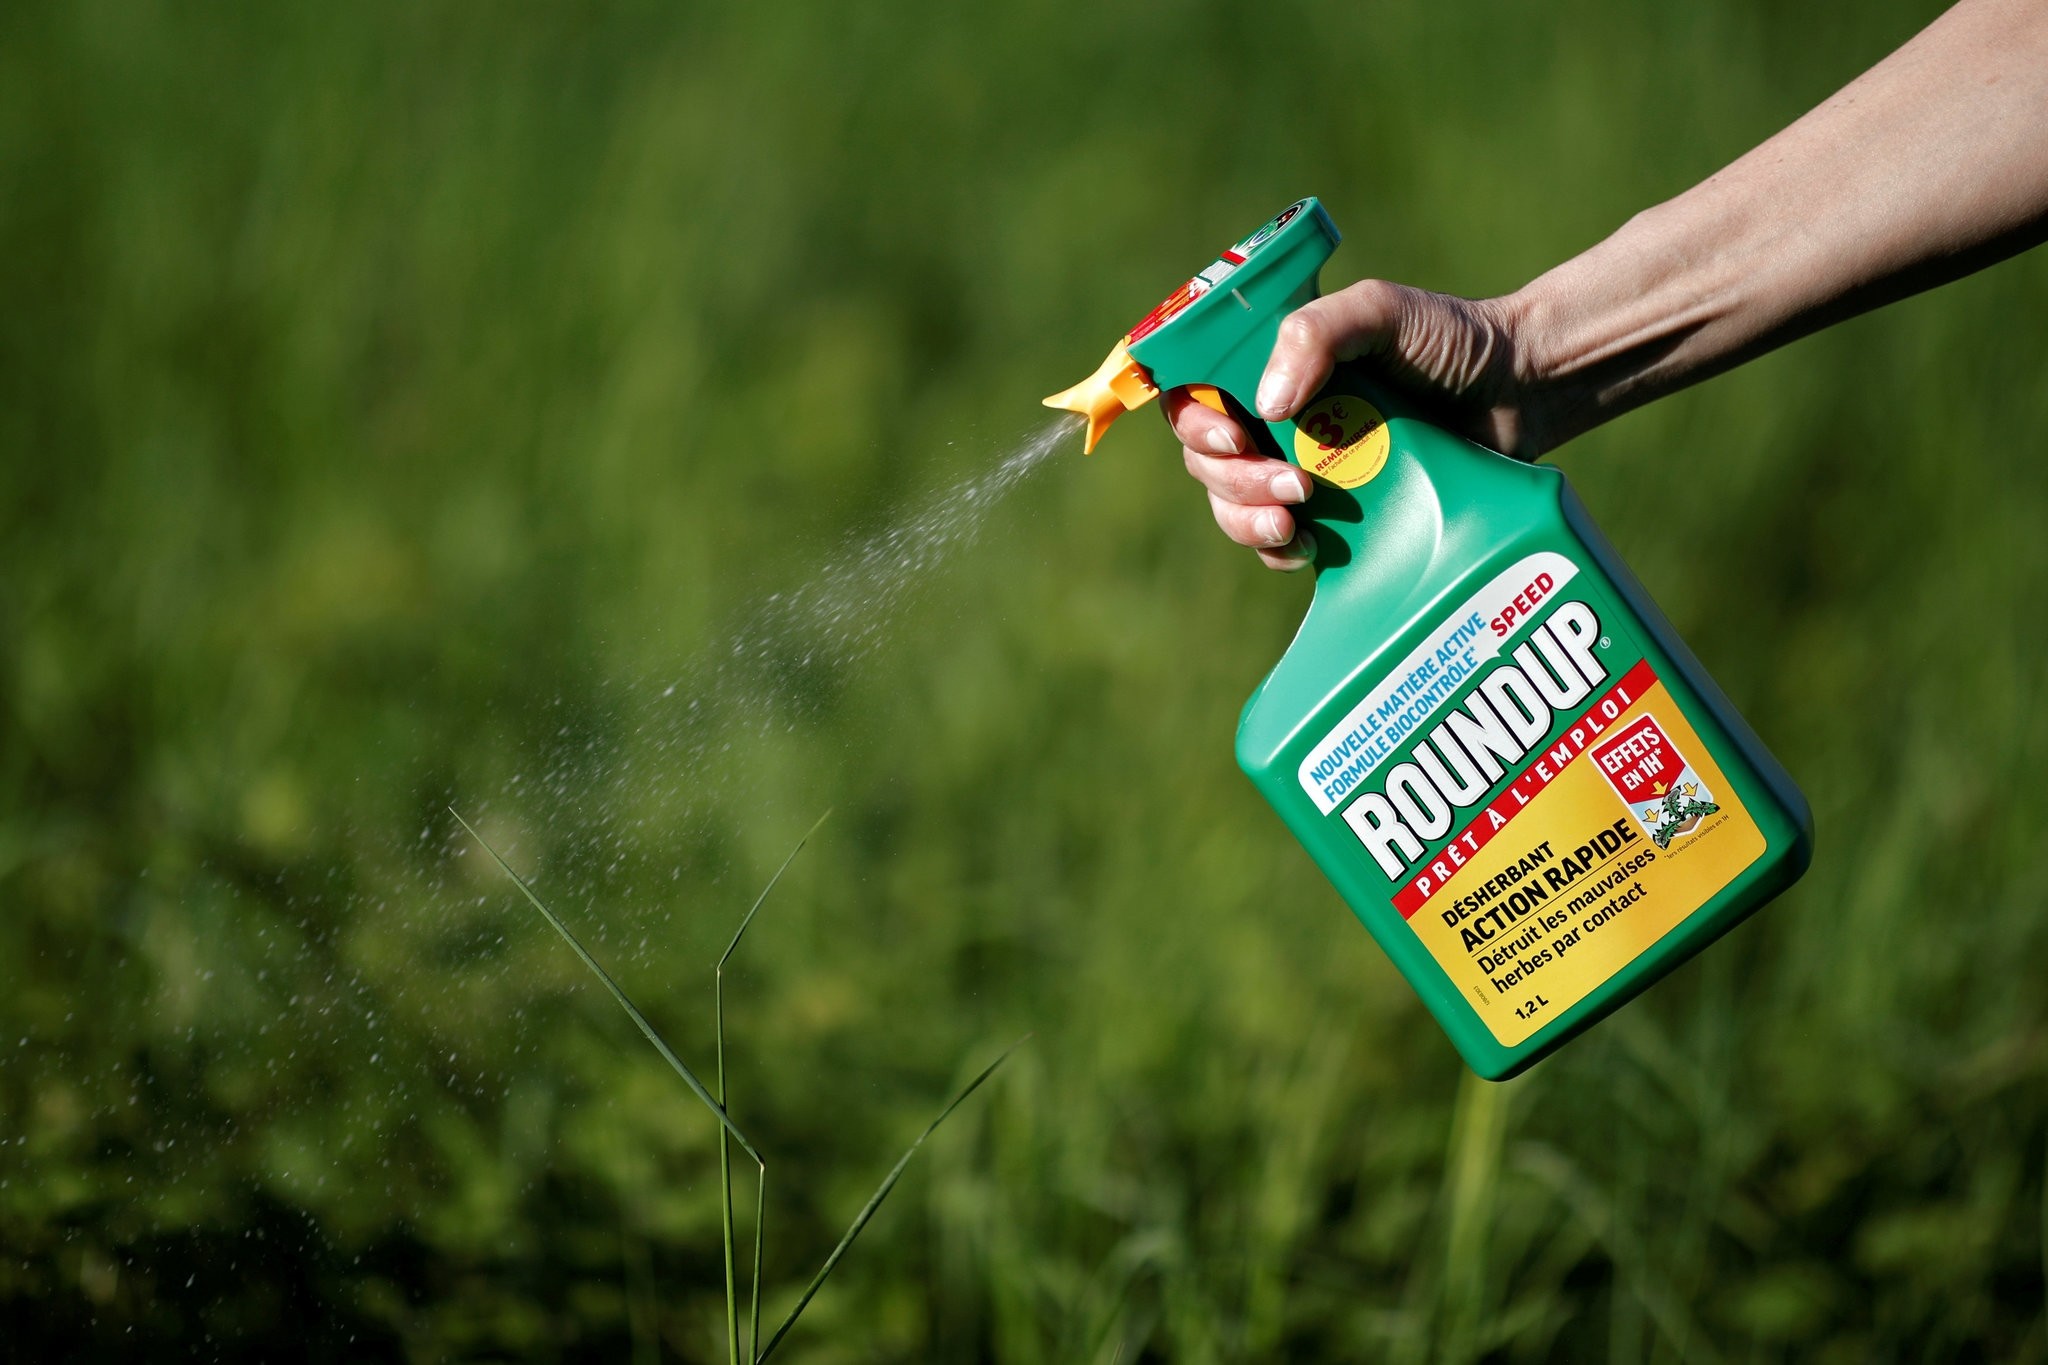 A woman uses a Monsanto's Roundup weedkiller spray without glyphosate in a garden in Ercuis near Paris. (REUTERS Photo)